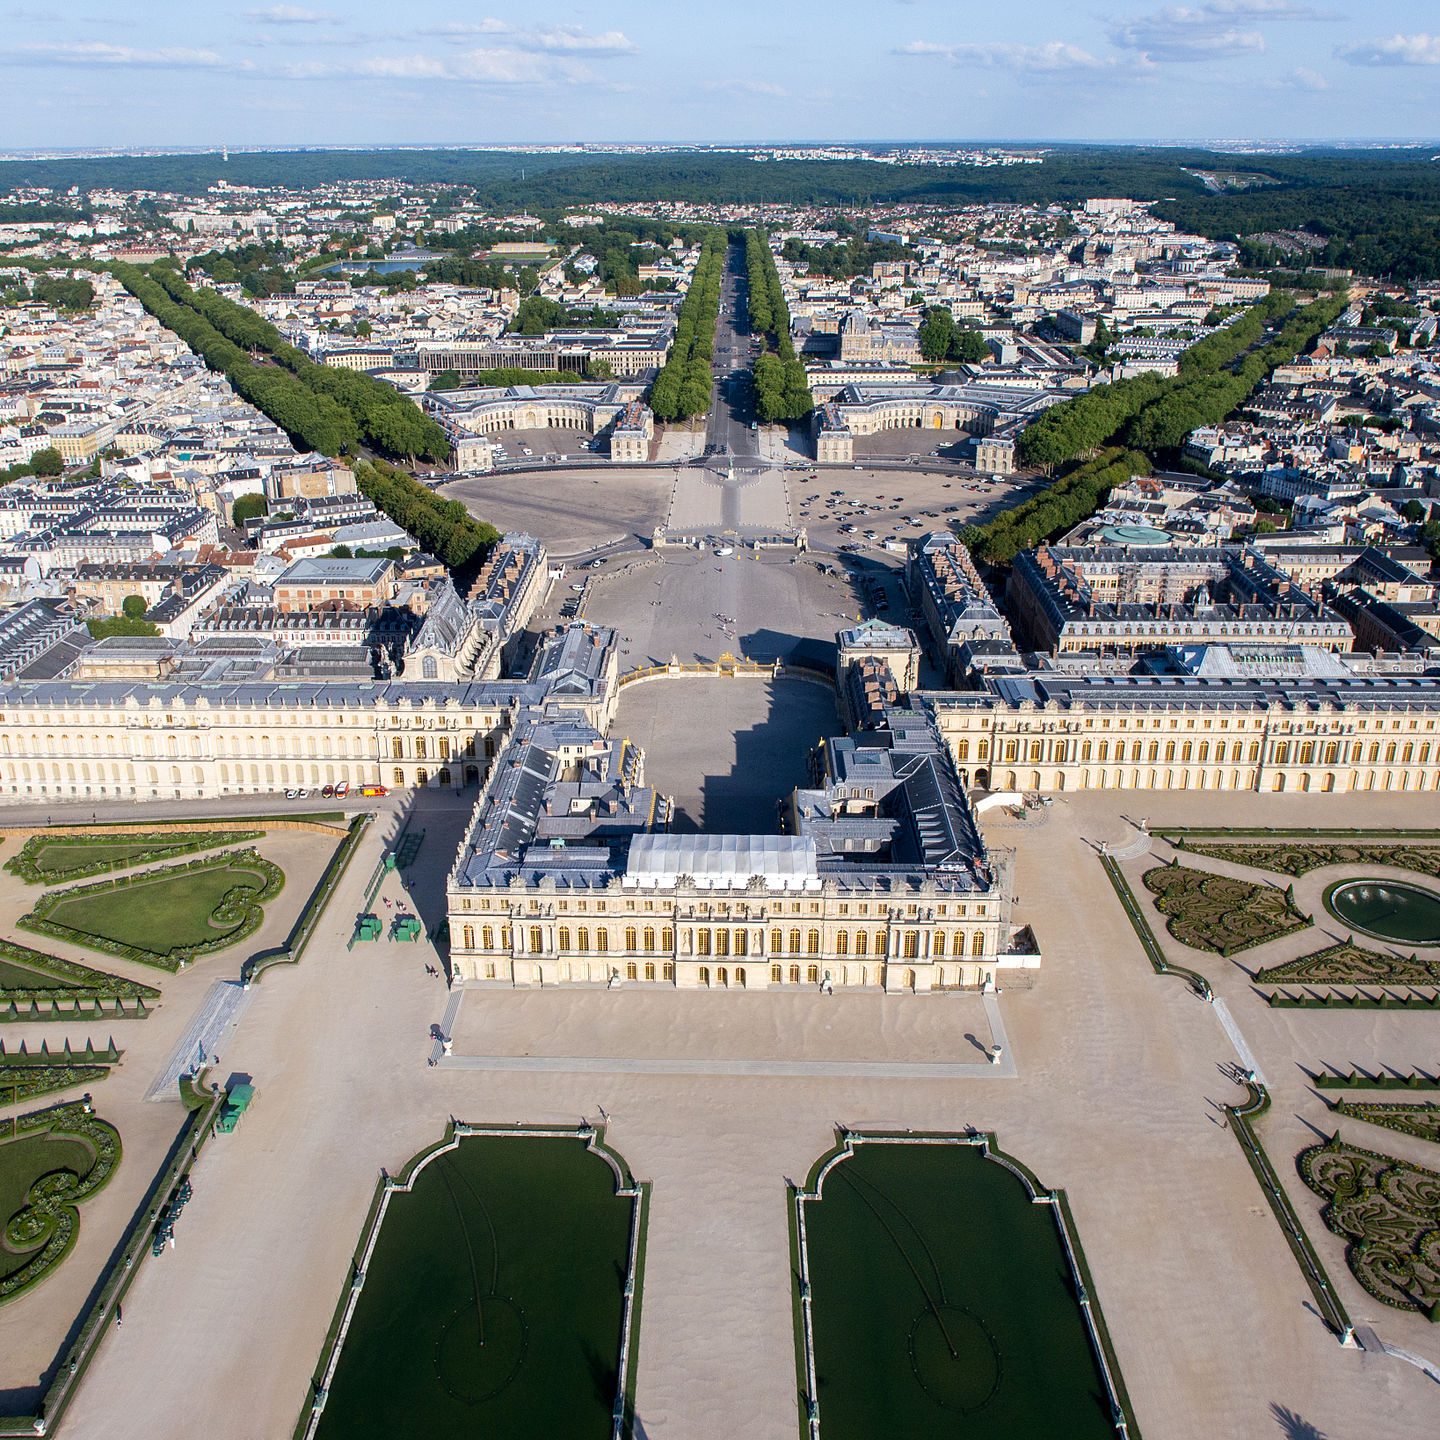 Image from https://en.wikipedia.org/wiki/Palace_of_Versailles#/media/File:Vue_a%C3%A9rienne_du_domaine_de_Versailles_par_ToucanWings_-_Creative_Commons_By_Sa_3.0_-_073.jpg